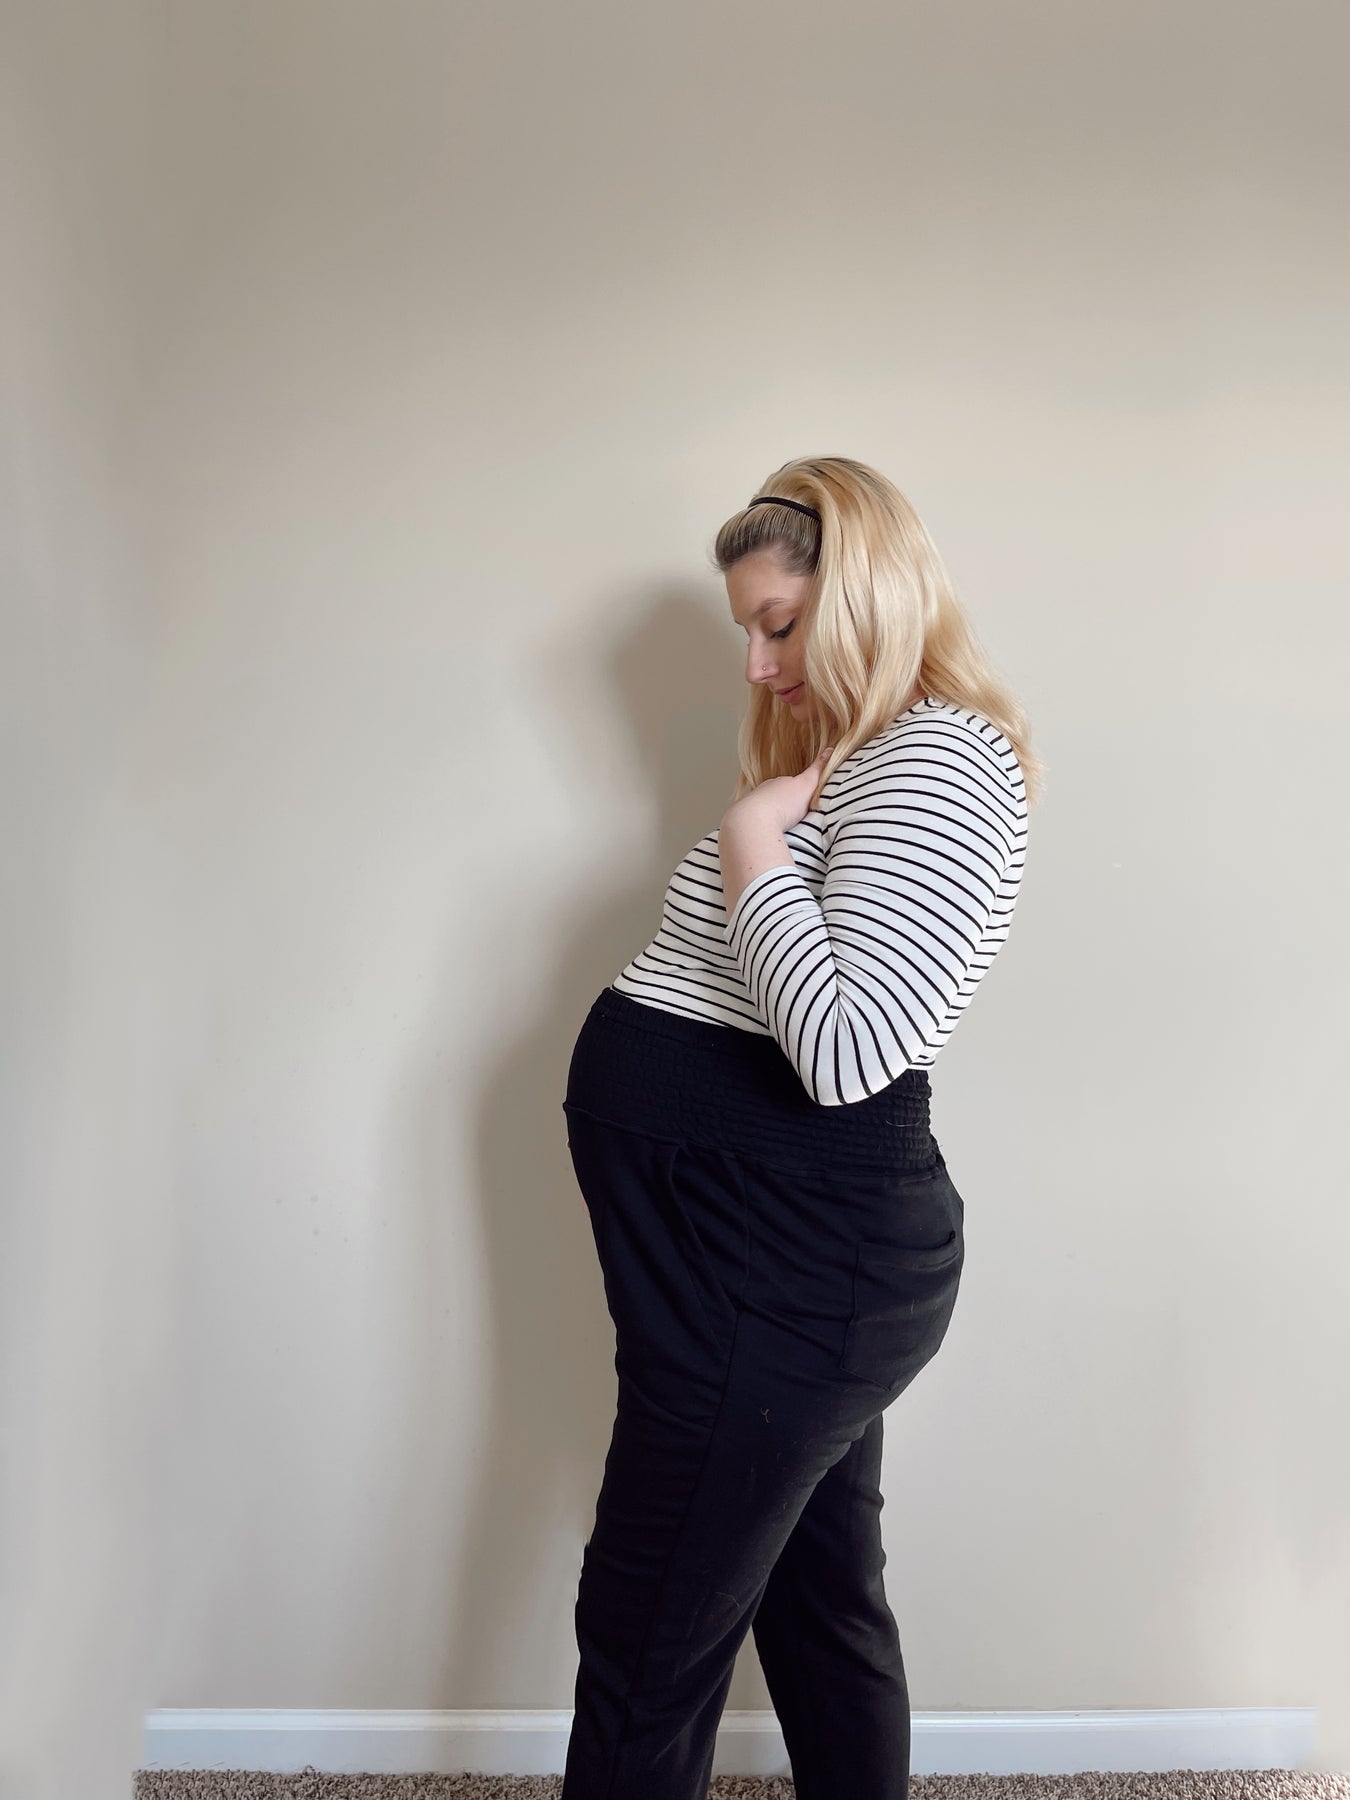 How do maternity pants work? – Happily Ever After Maternity